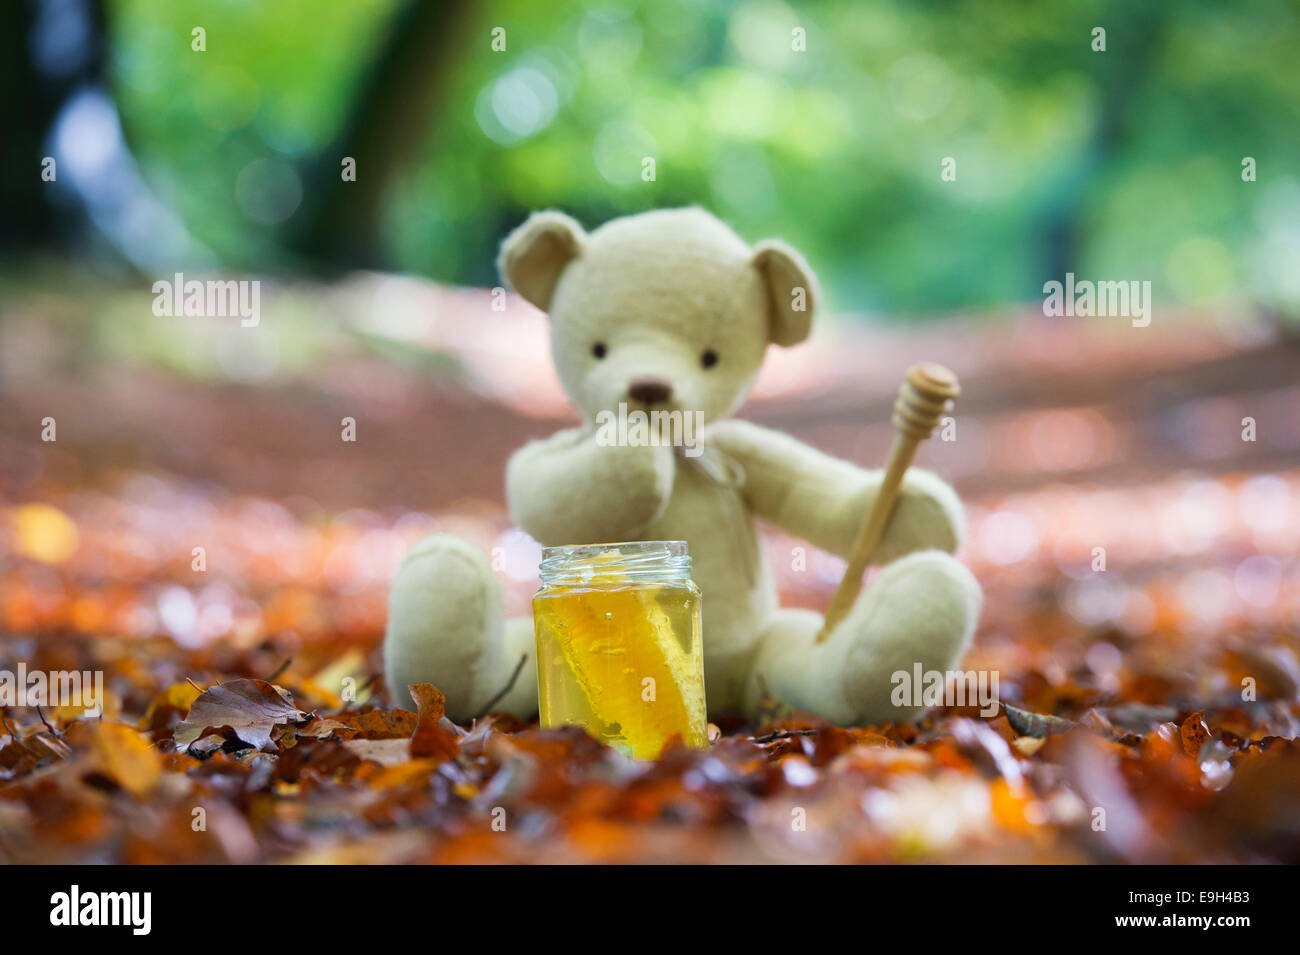 Teddy bear in a woodland in autumn contemplating eating a pot of honey Stock Photo